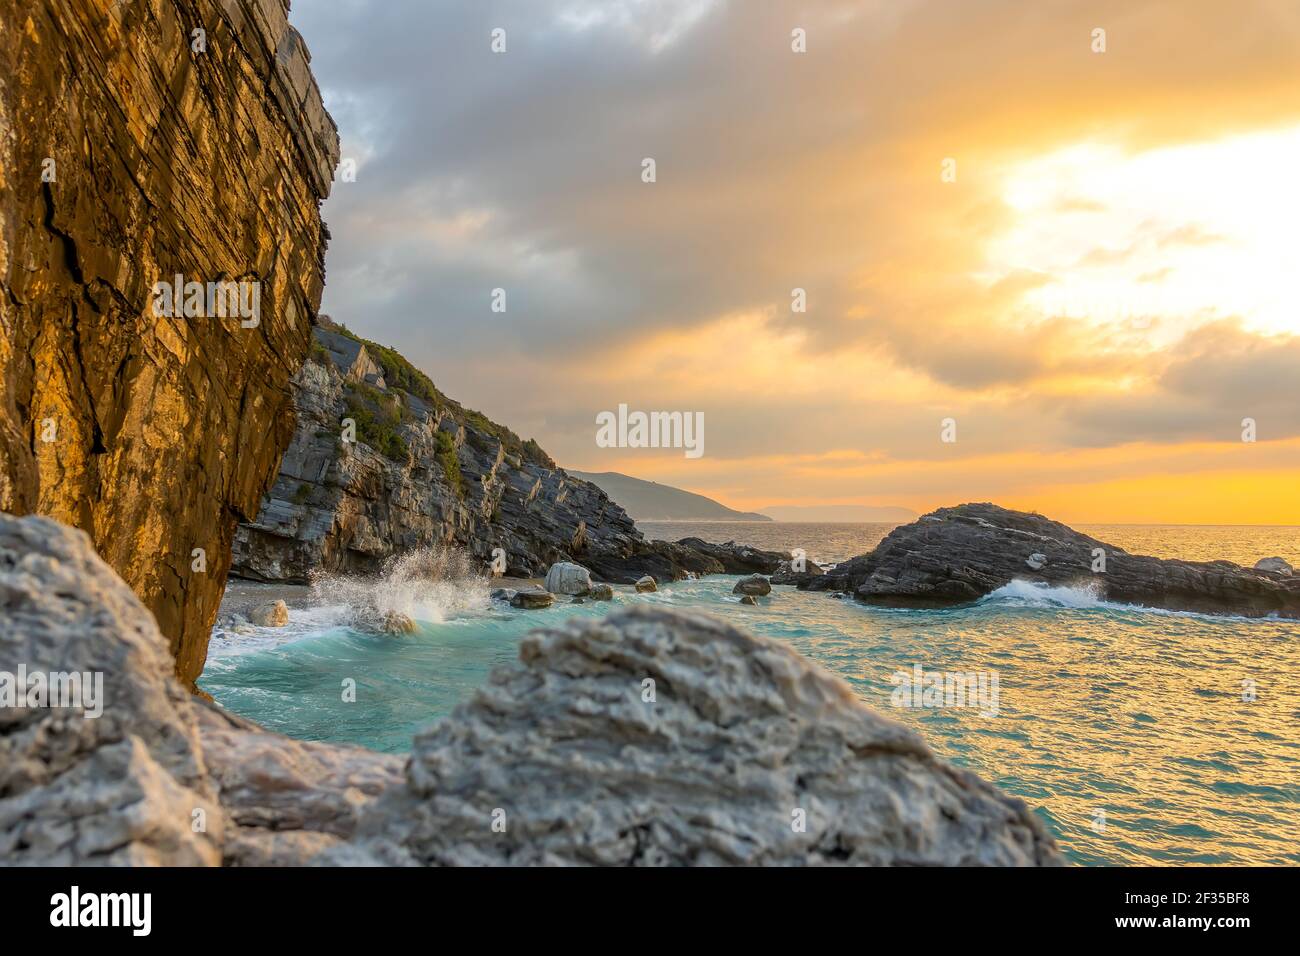 Summer evening and a small beach on a rocky beach. Wave smashes on coastal rocks with lots of splashes Stock Photo